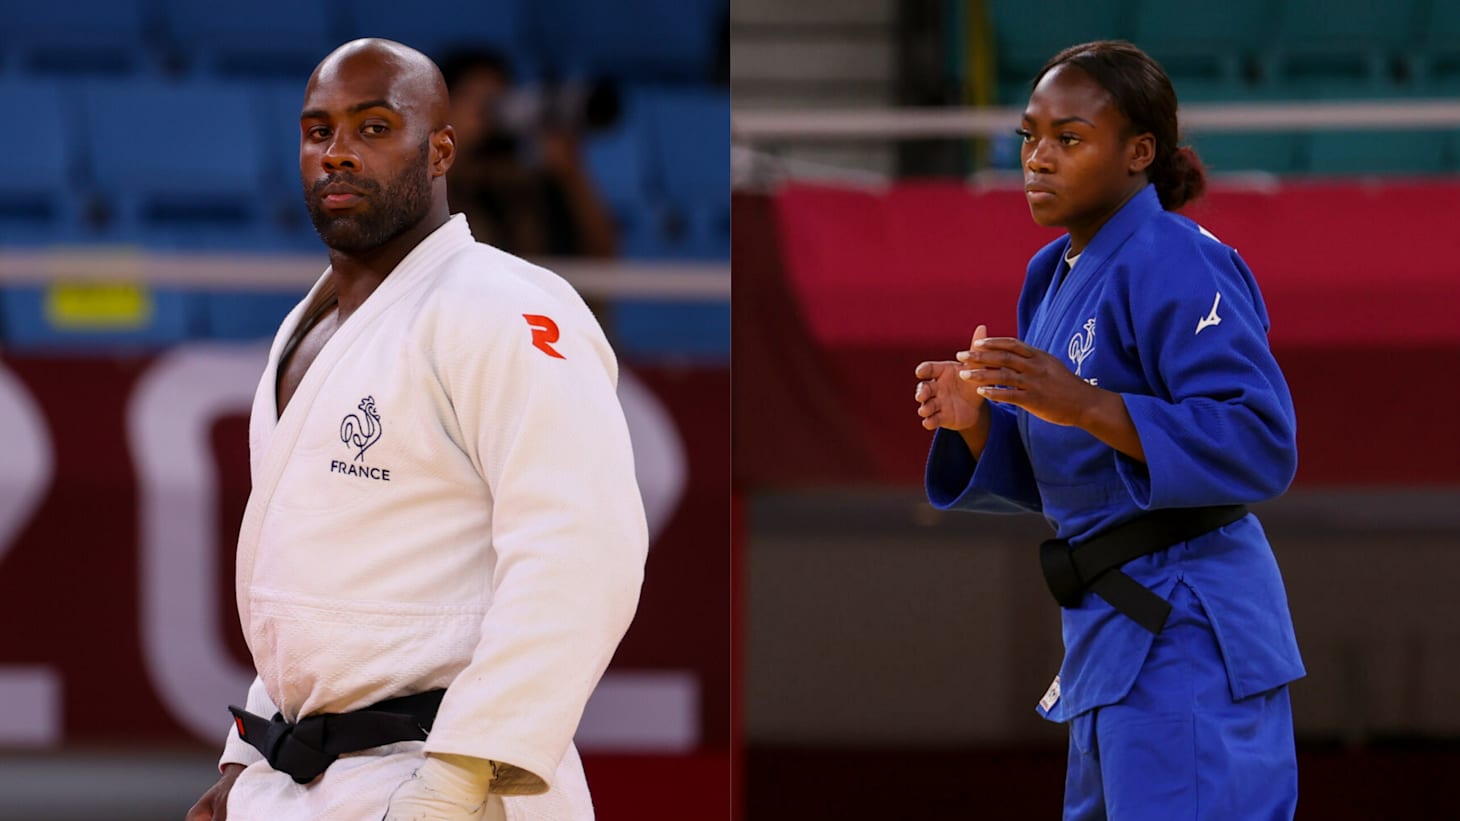 2023 Judo World Championships in Doha, Qatar: All results and medal winners  - Full list